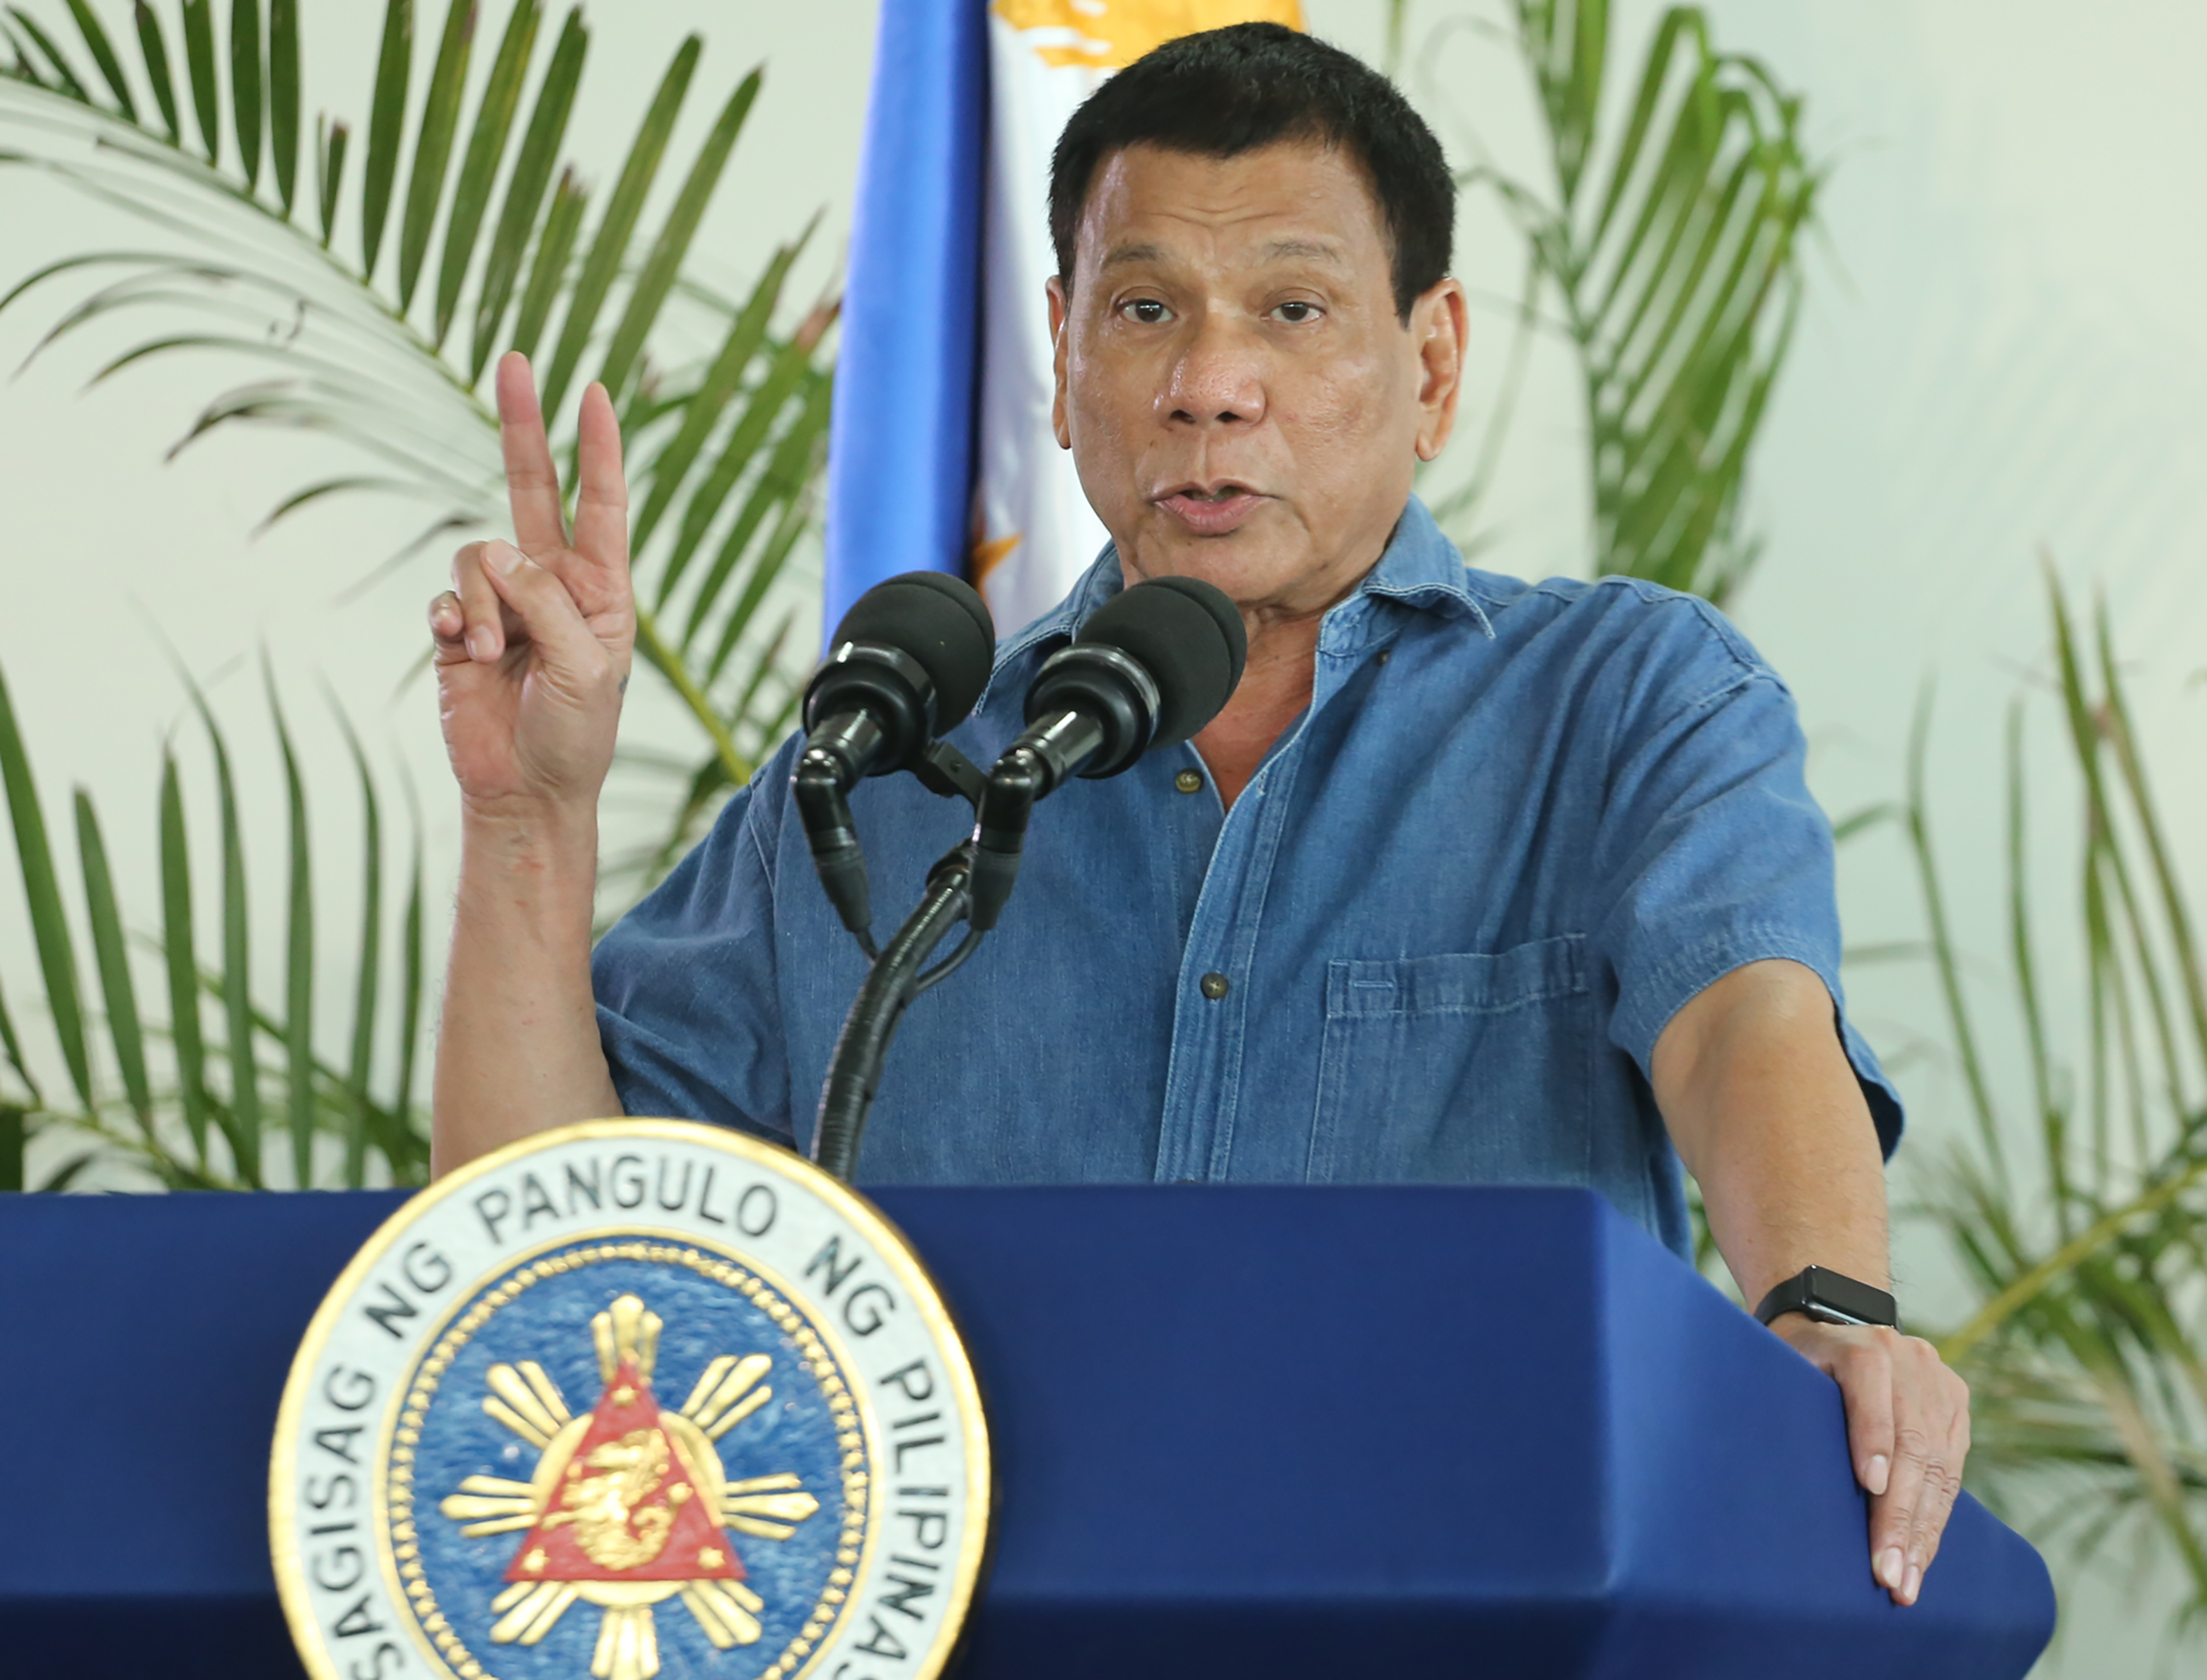 Philippine President Rodrigo Duterte gestures as he delivers his speech prior to departing for a visit to Brunei and China at Davao airport on October 16, 2016. (AFP/Getty Images)